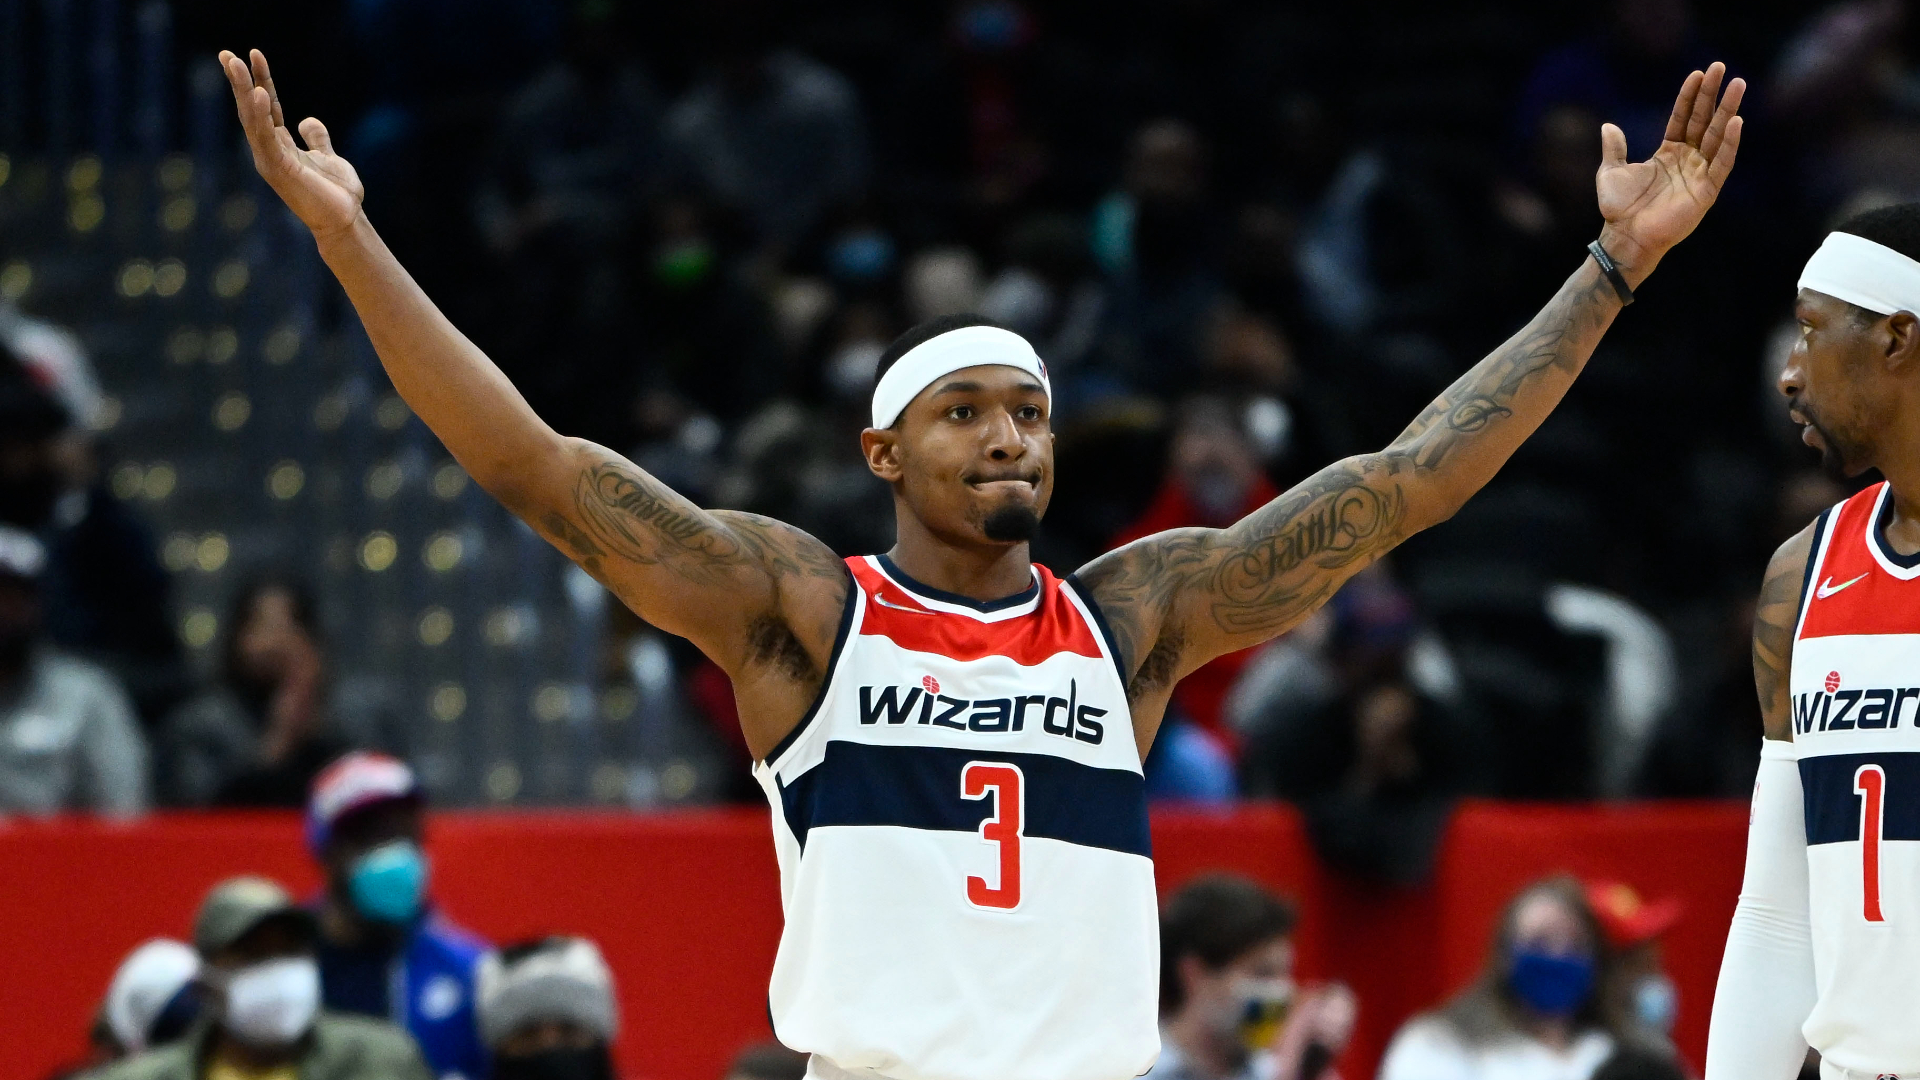 Wizards Officially Announce Bradley Beal's Five-Year Extension